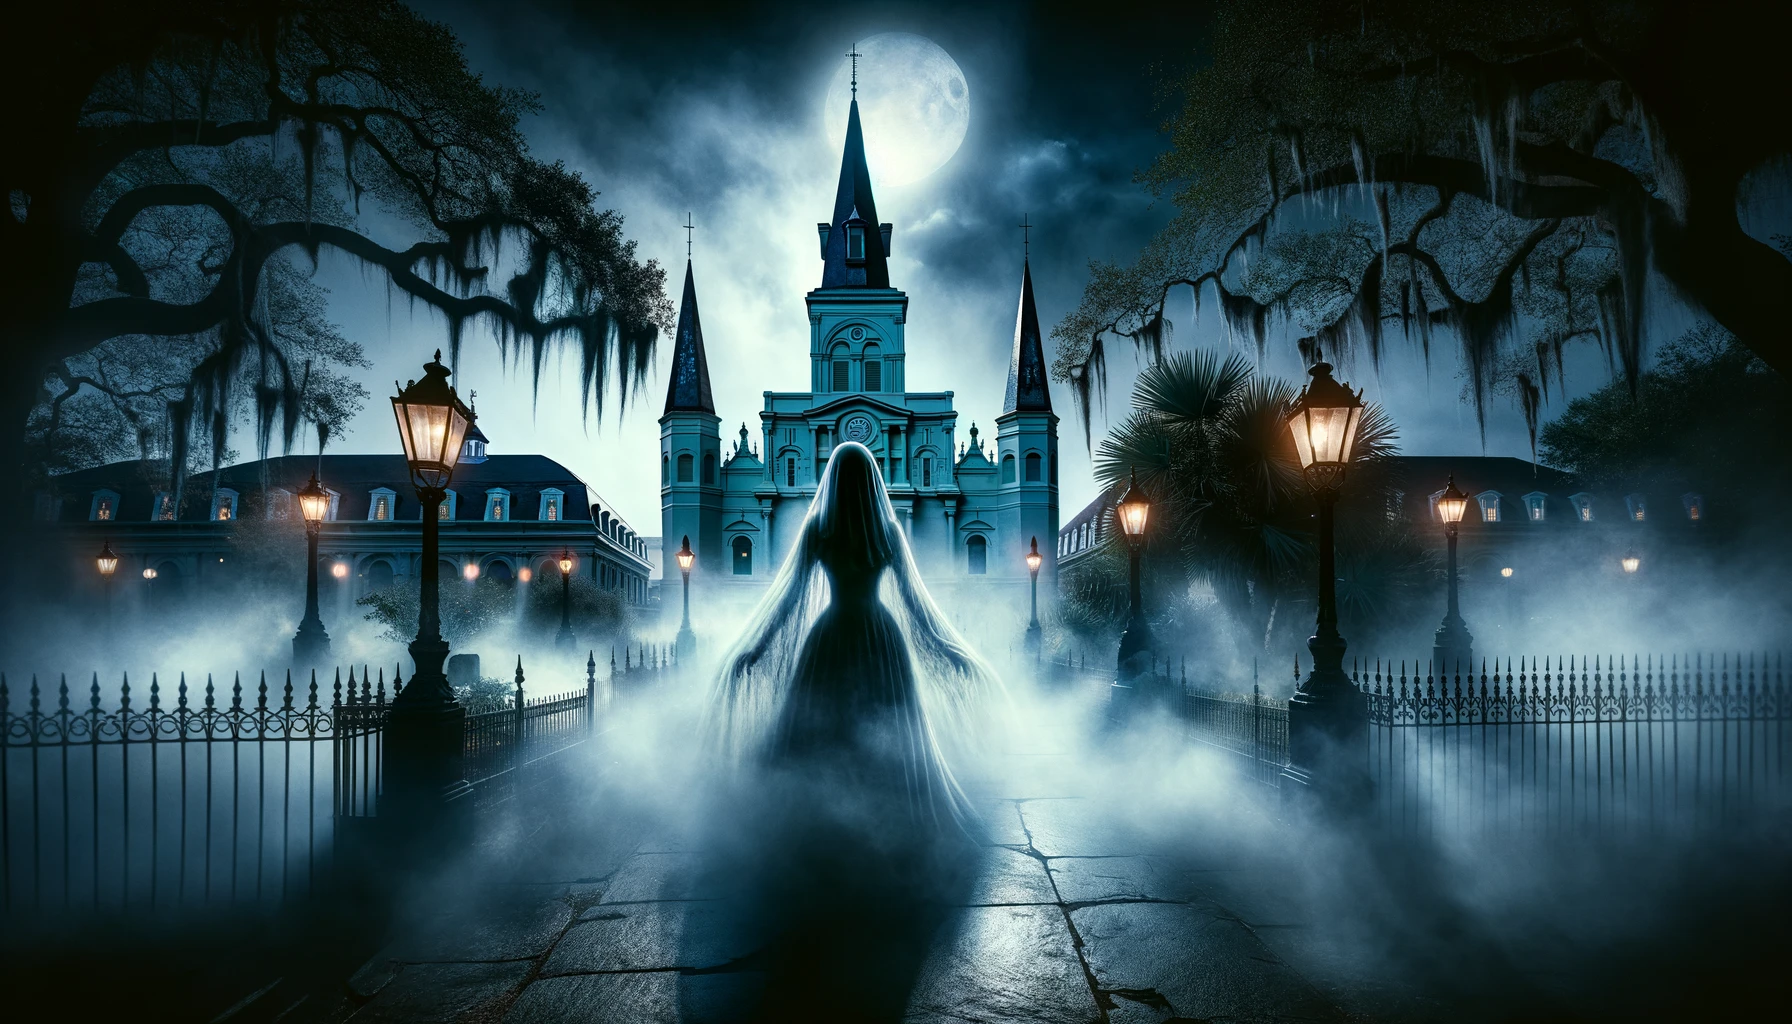 One of the haunted locations where your Tour Guide will take you on the Ghosts of New Orleans Tour.